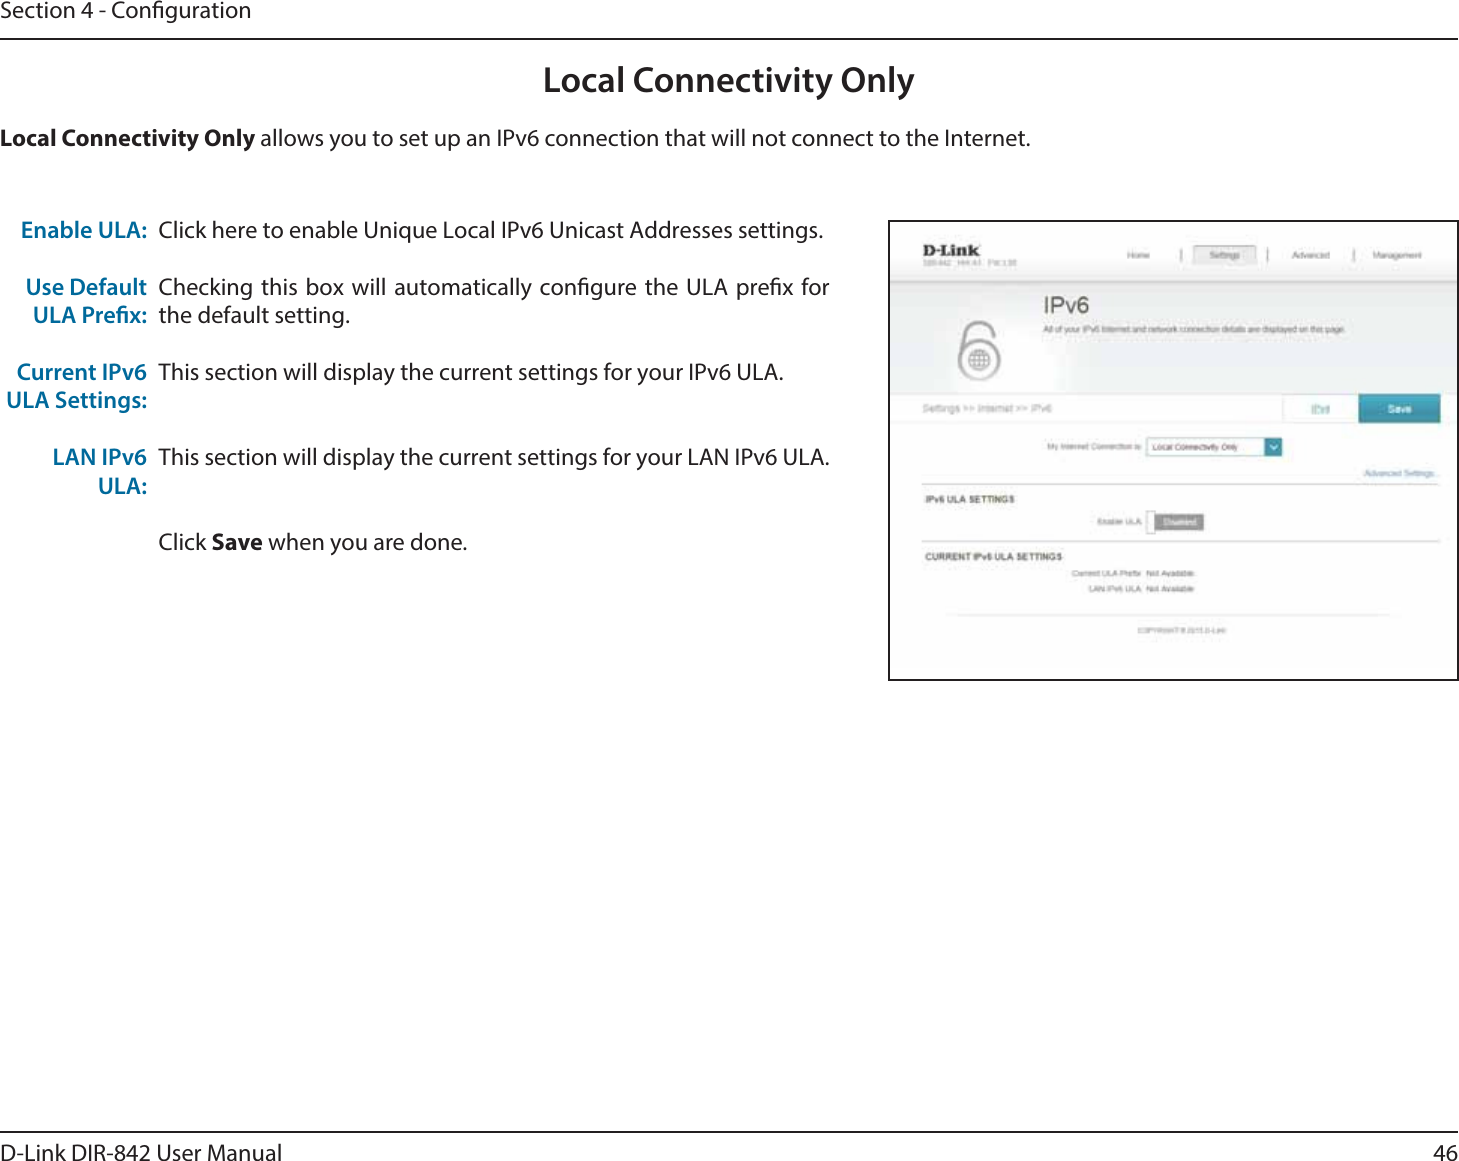 46D-Link DIR-842 User ManualSection 4 - CongurationLocal Connectivity OnlyClick here to enable Unique Local IPv6 Unicast Addresses settings.Checking this box will automatically congure the ULA prex for the default setting.This section will display the current settings for your IPv6 ULA.This section will display the current settings for your LAN IPv6 ULA.Click Save when you are done.Enable ULA:Use Default ULA Prex:Current IPv6 ULA Settings:LAN IPv6ULA:-PDBM$POOFDUJWJUZ0OMZ allows you to set up an IPv6 connection that will not connect to the Internet.